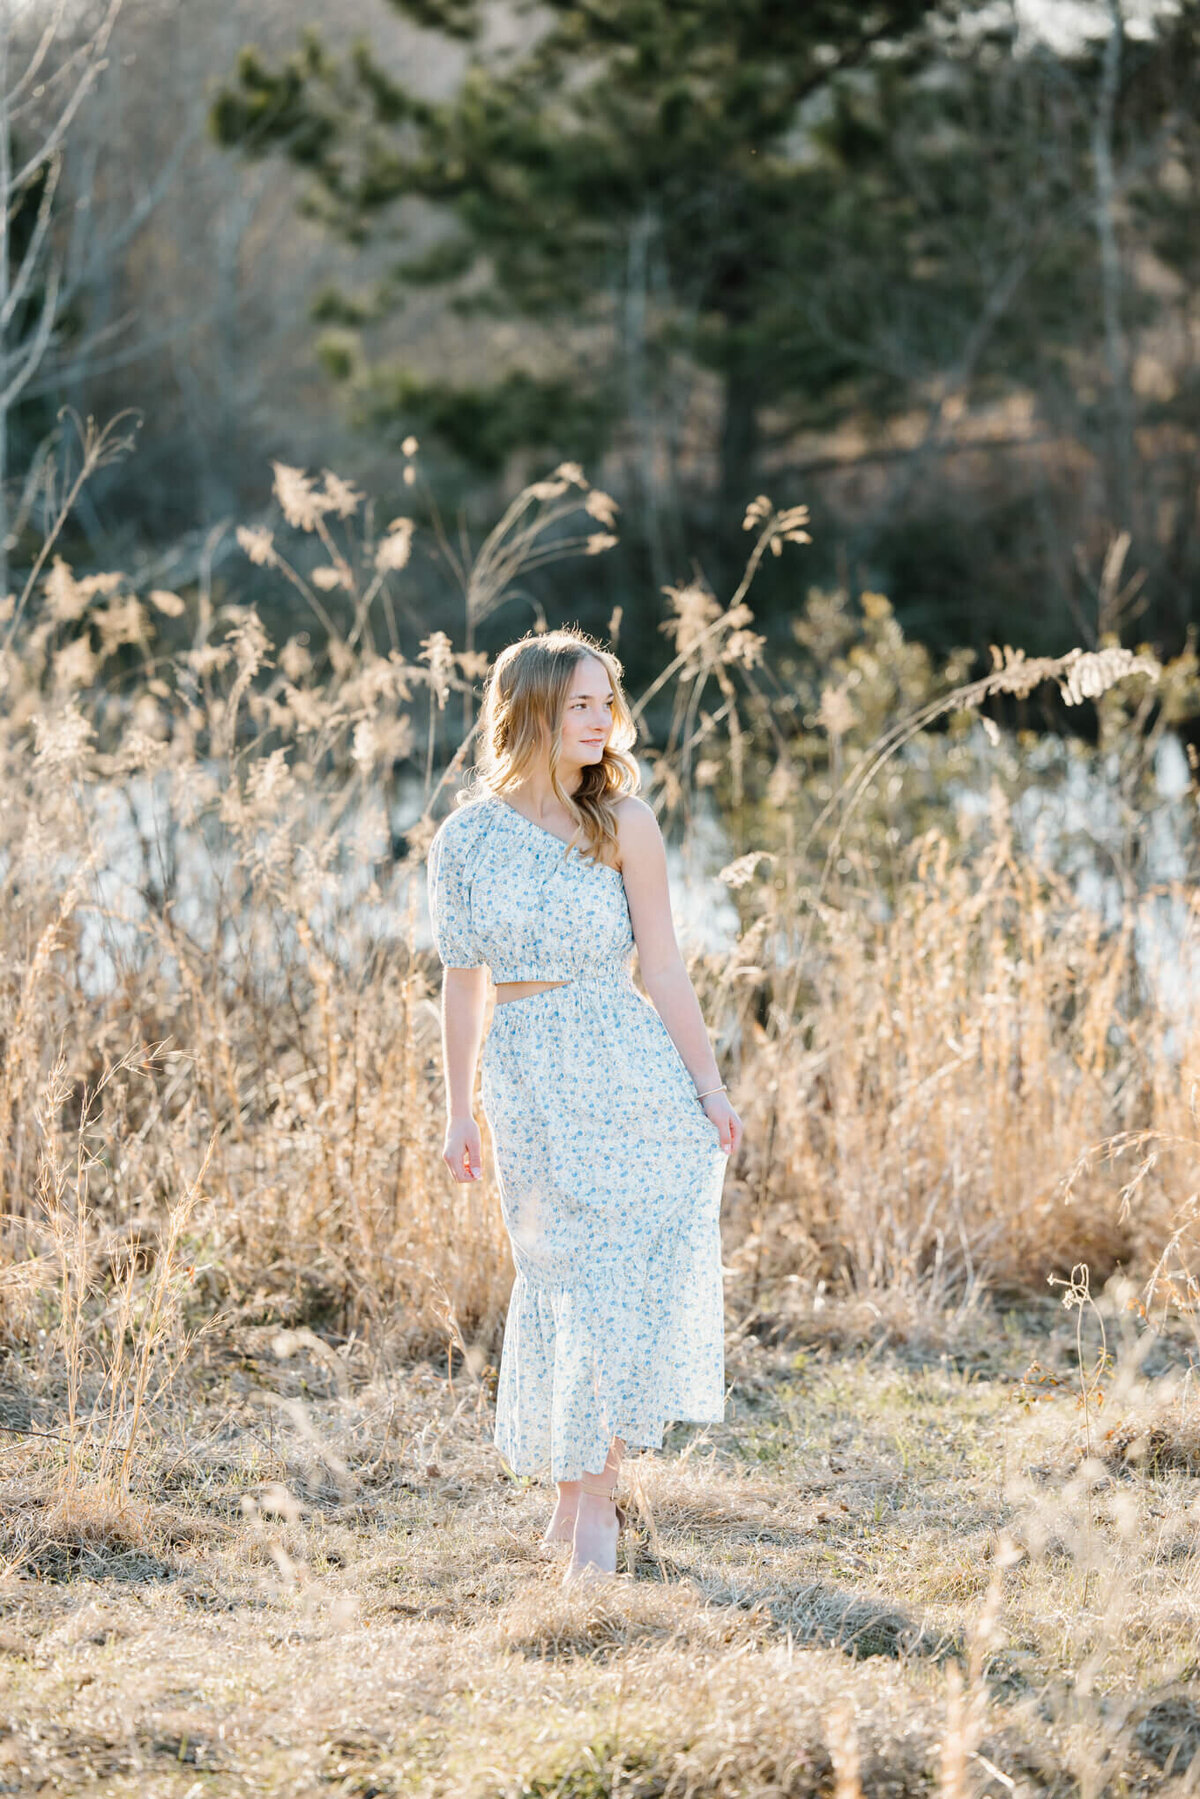 candid photograph of teenage girl wearing long dress while standing in open field during family photo session